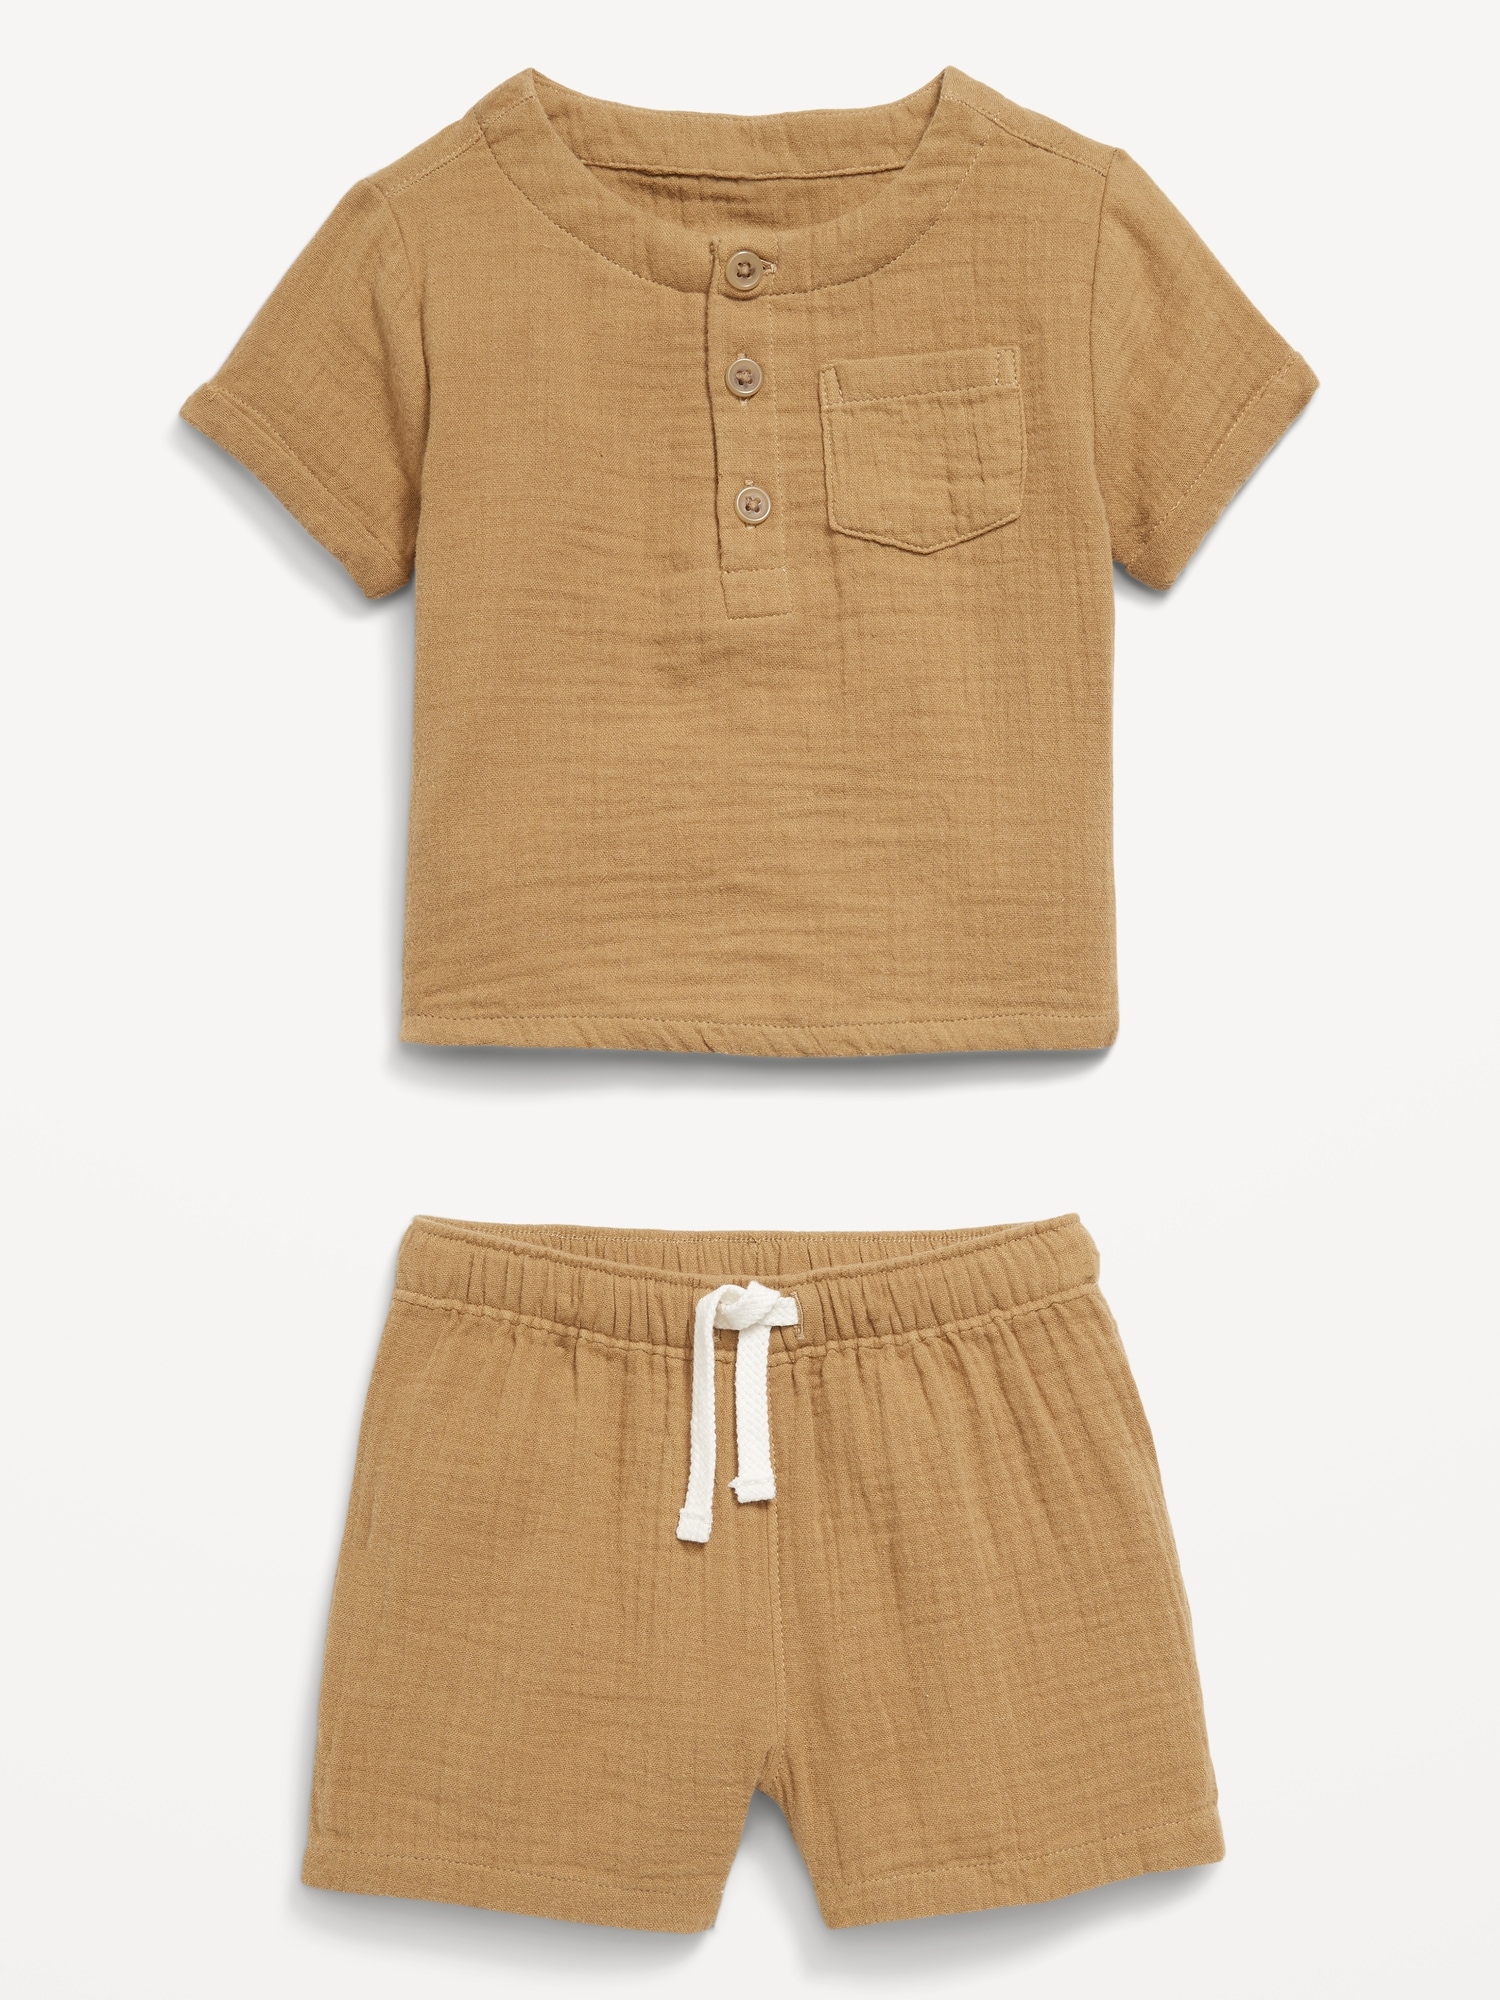 Double-Weave Henley Top and Shorts Set for Baby